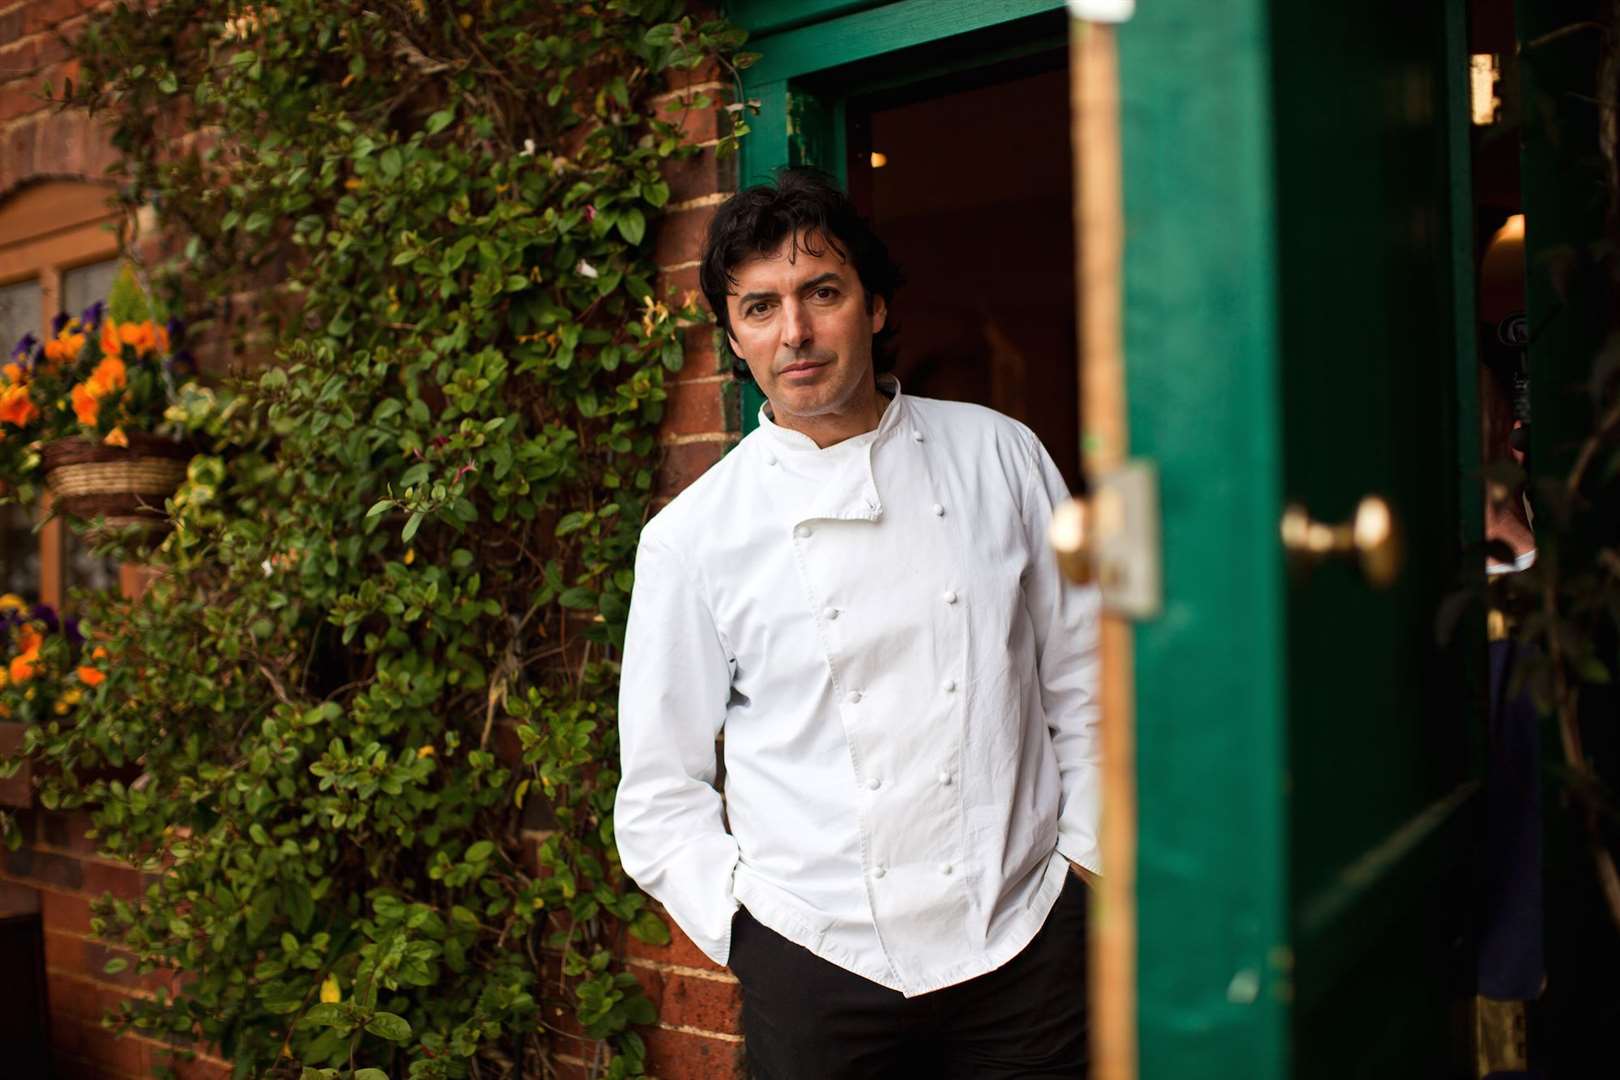 Jean-Christophe Novelli is the special guest at the Taste North festival in John O'Groats on October 6.